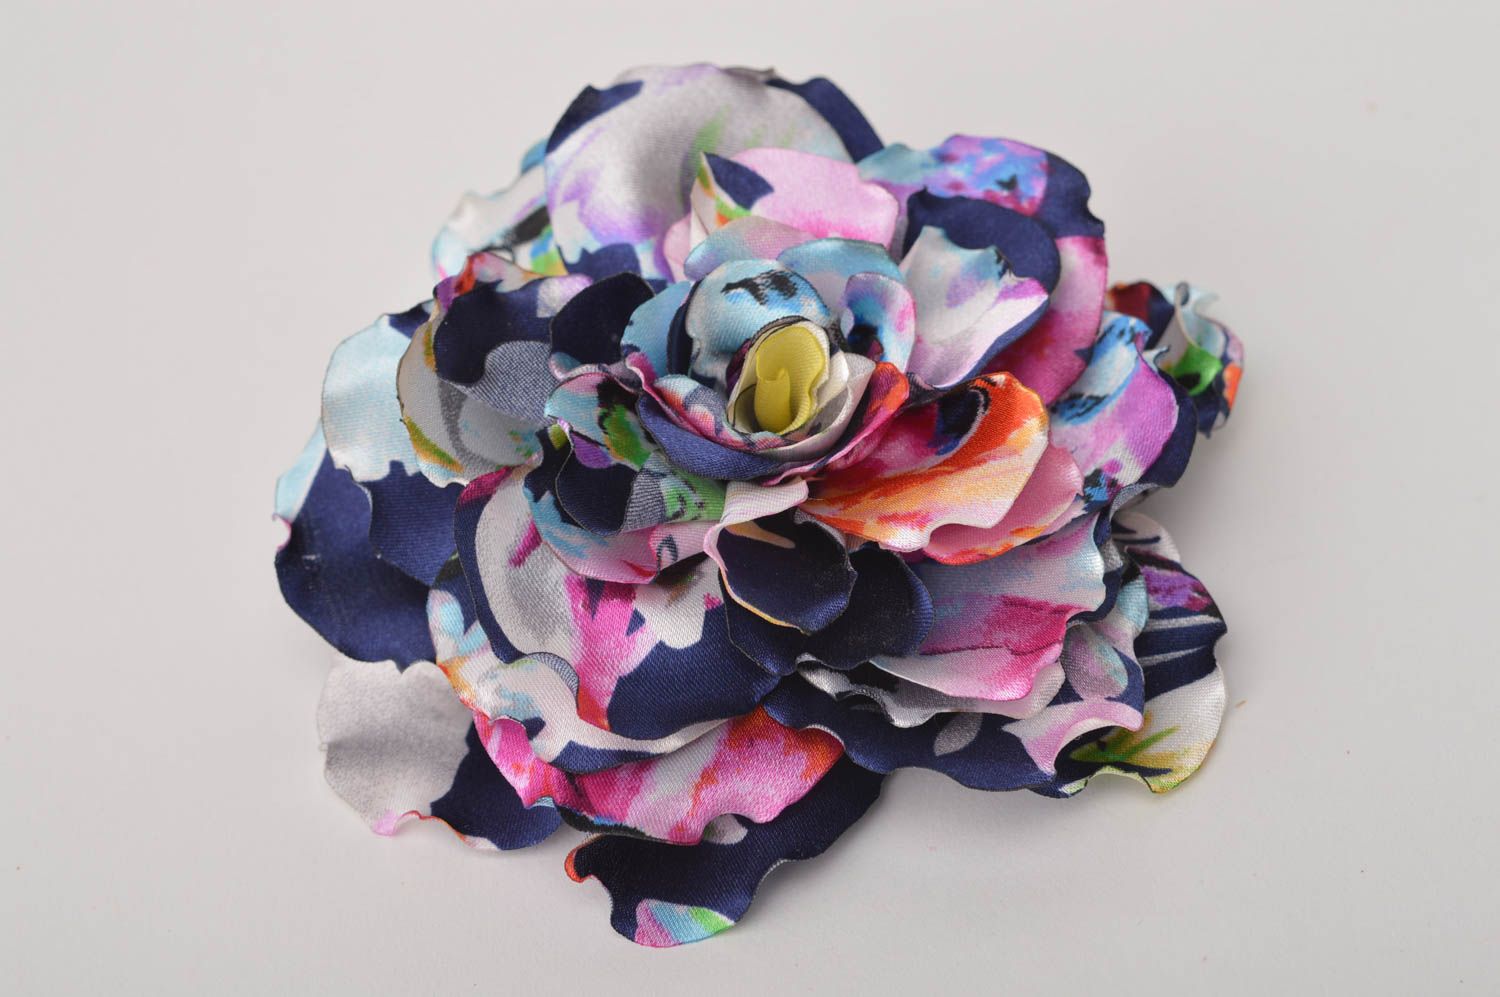 Brooch handmade flowers for hair hair accessories for girls best gifts for women photo 4